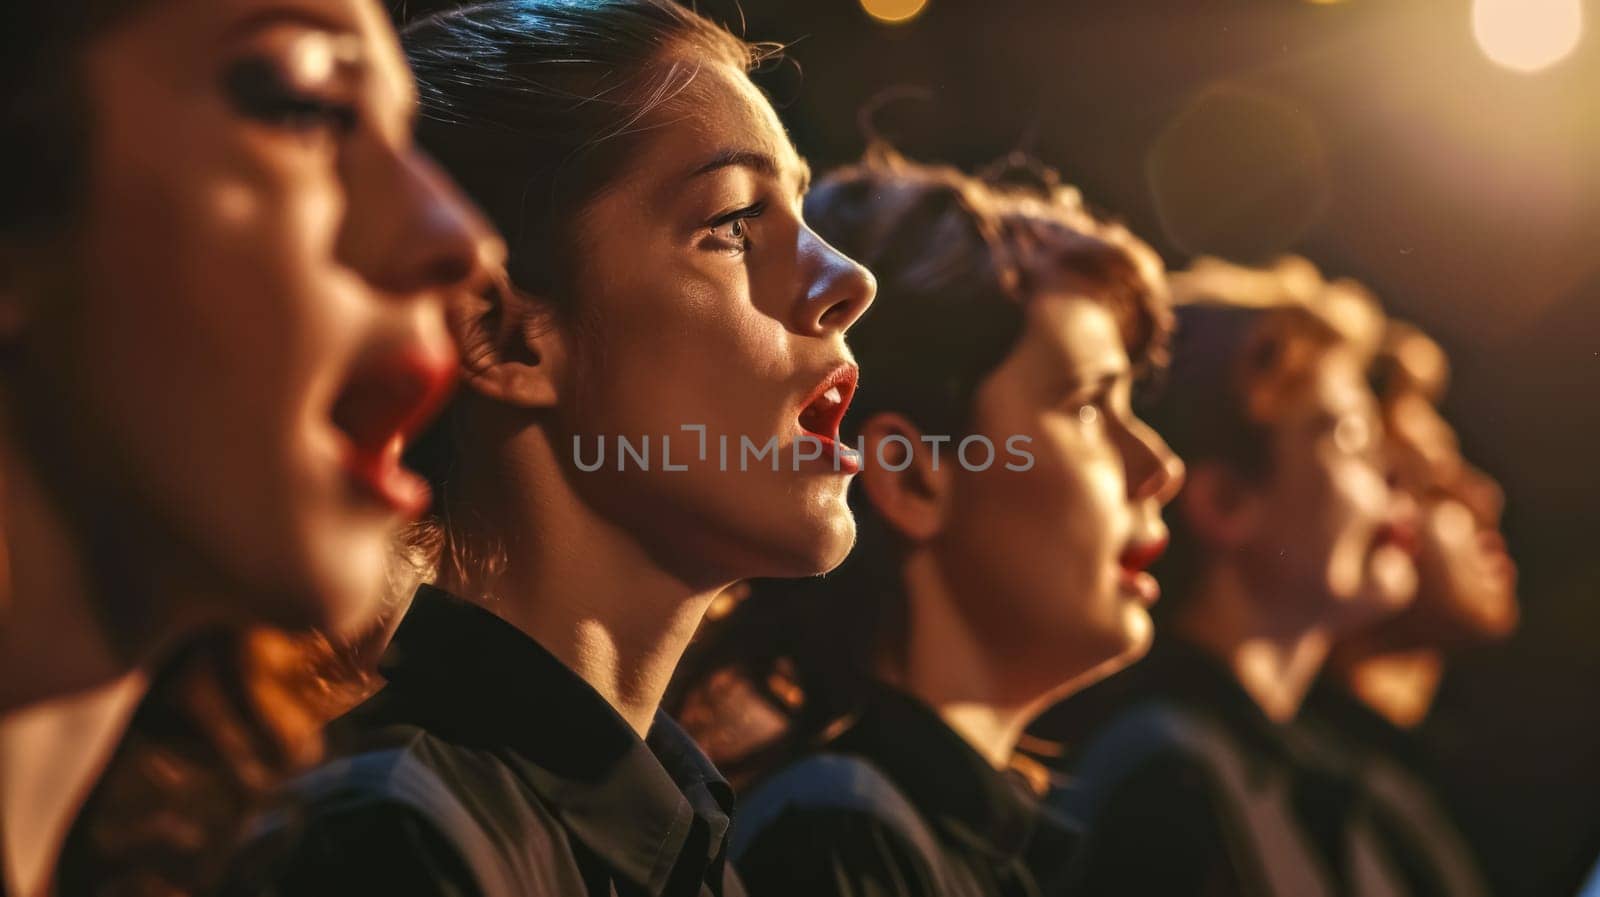 Captivating choir of diverse women performing on stage with beautiful lighting, showcasing their vocal harmony and artistic expression in a live musical concert event